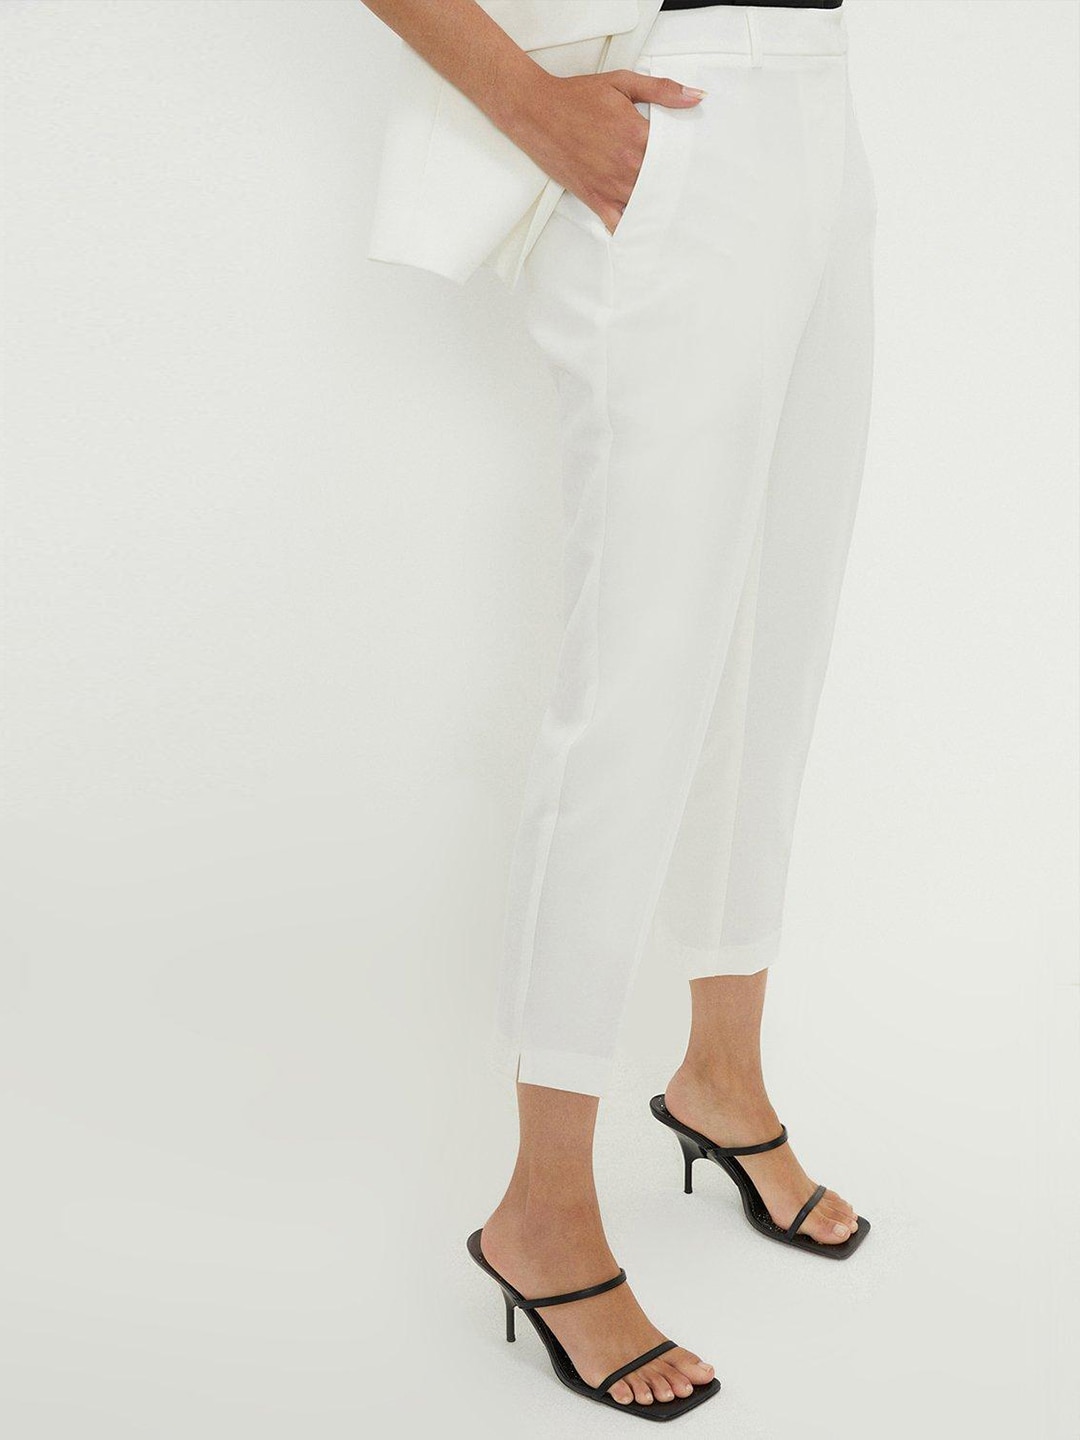 DOROTHY PERKINS Women Slim Fit Ankle Trousers Price in India